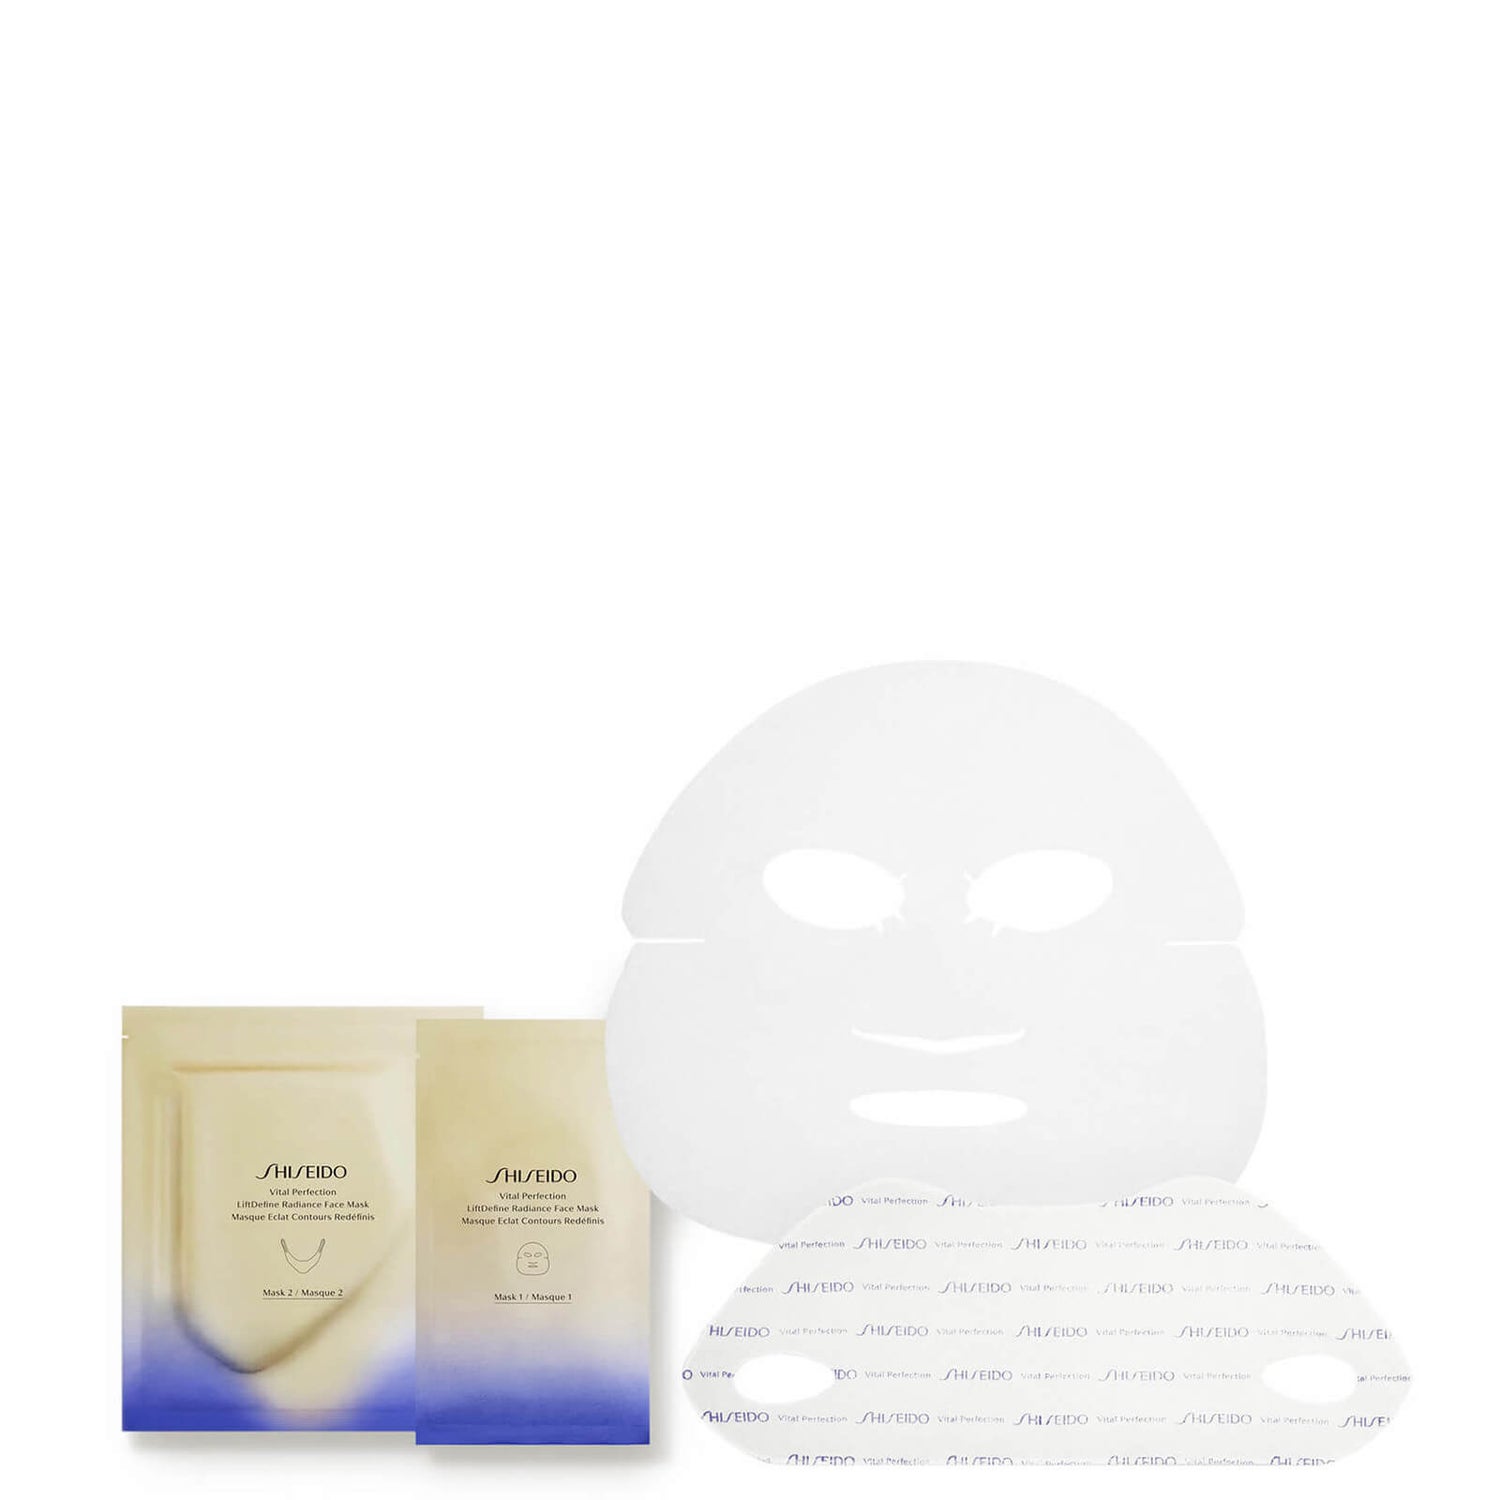 Shiseido Exclusive Vital Perfection LiftDefine Radiance Face Mask (Pack of 6)